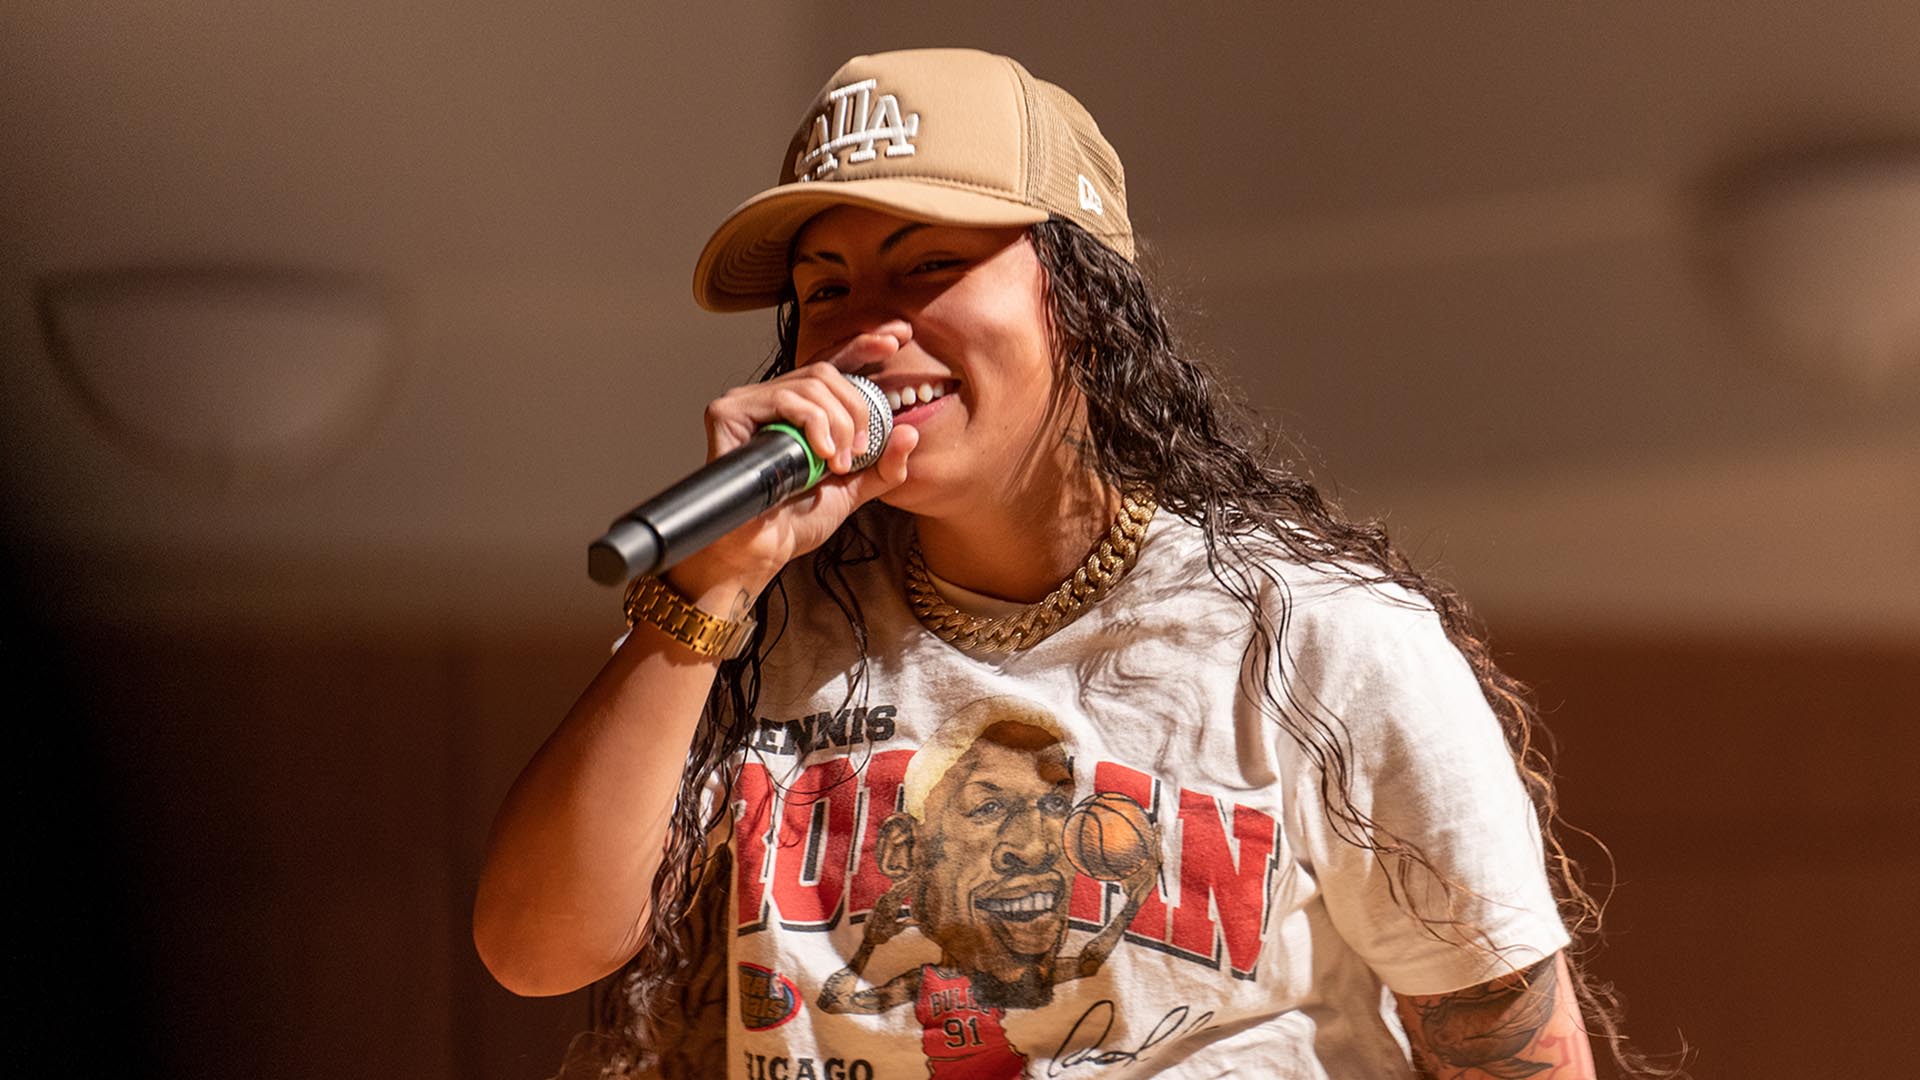 PHOTOS: Umoja Conference celebrates Black women in and of hip-hop